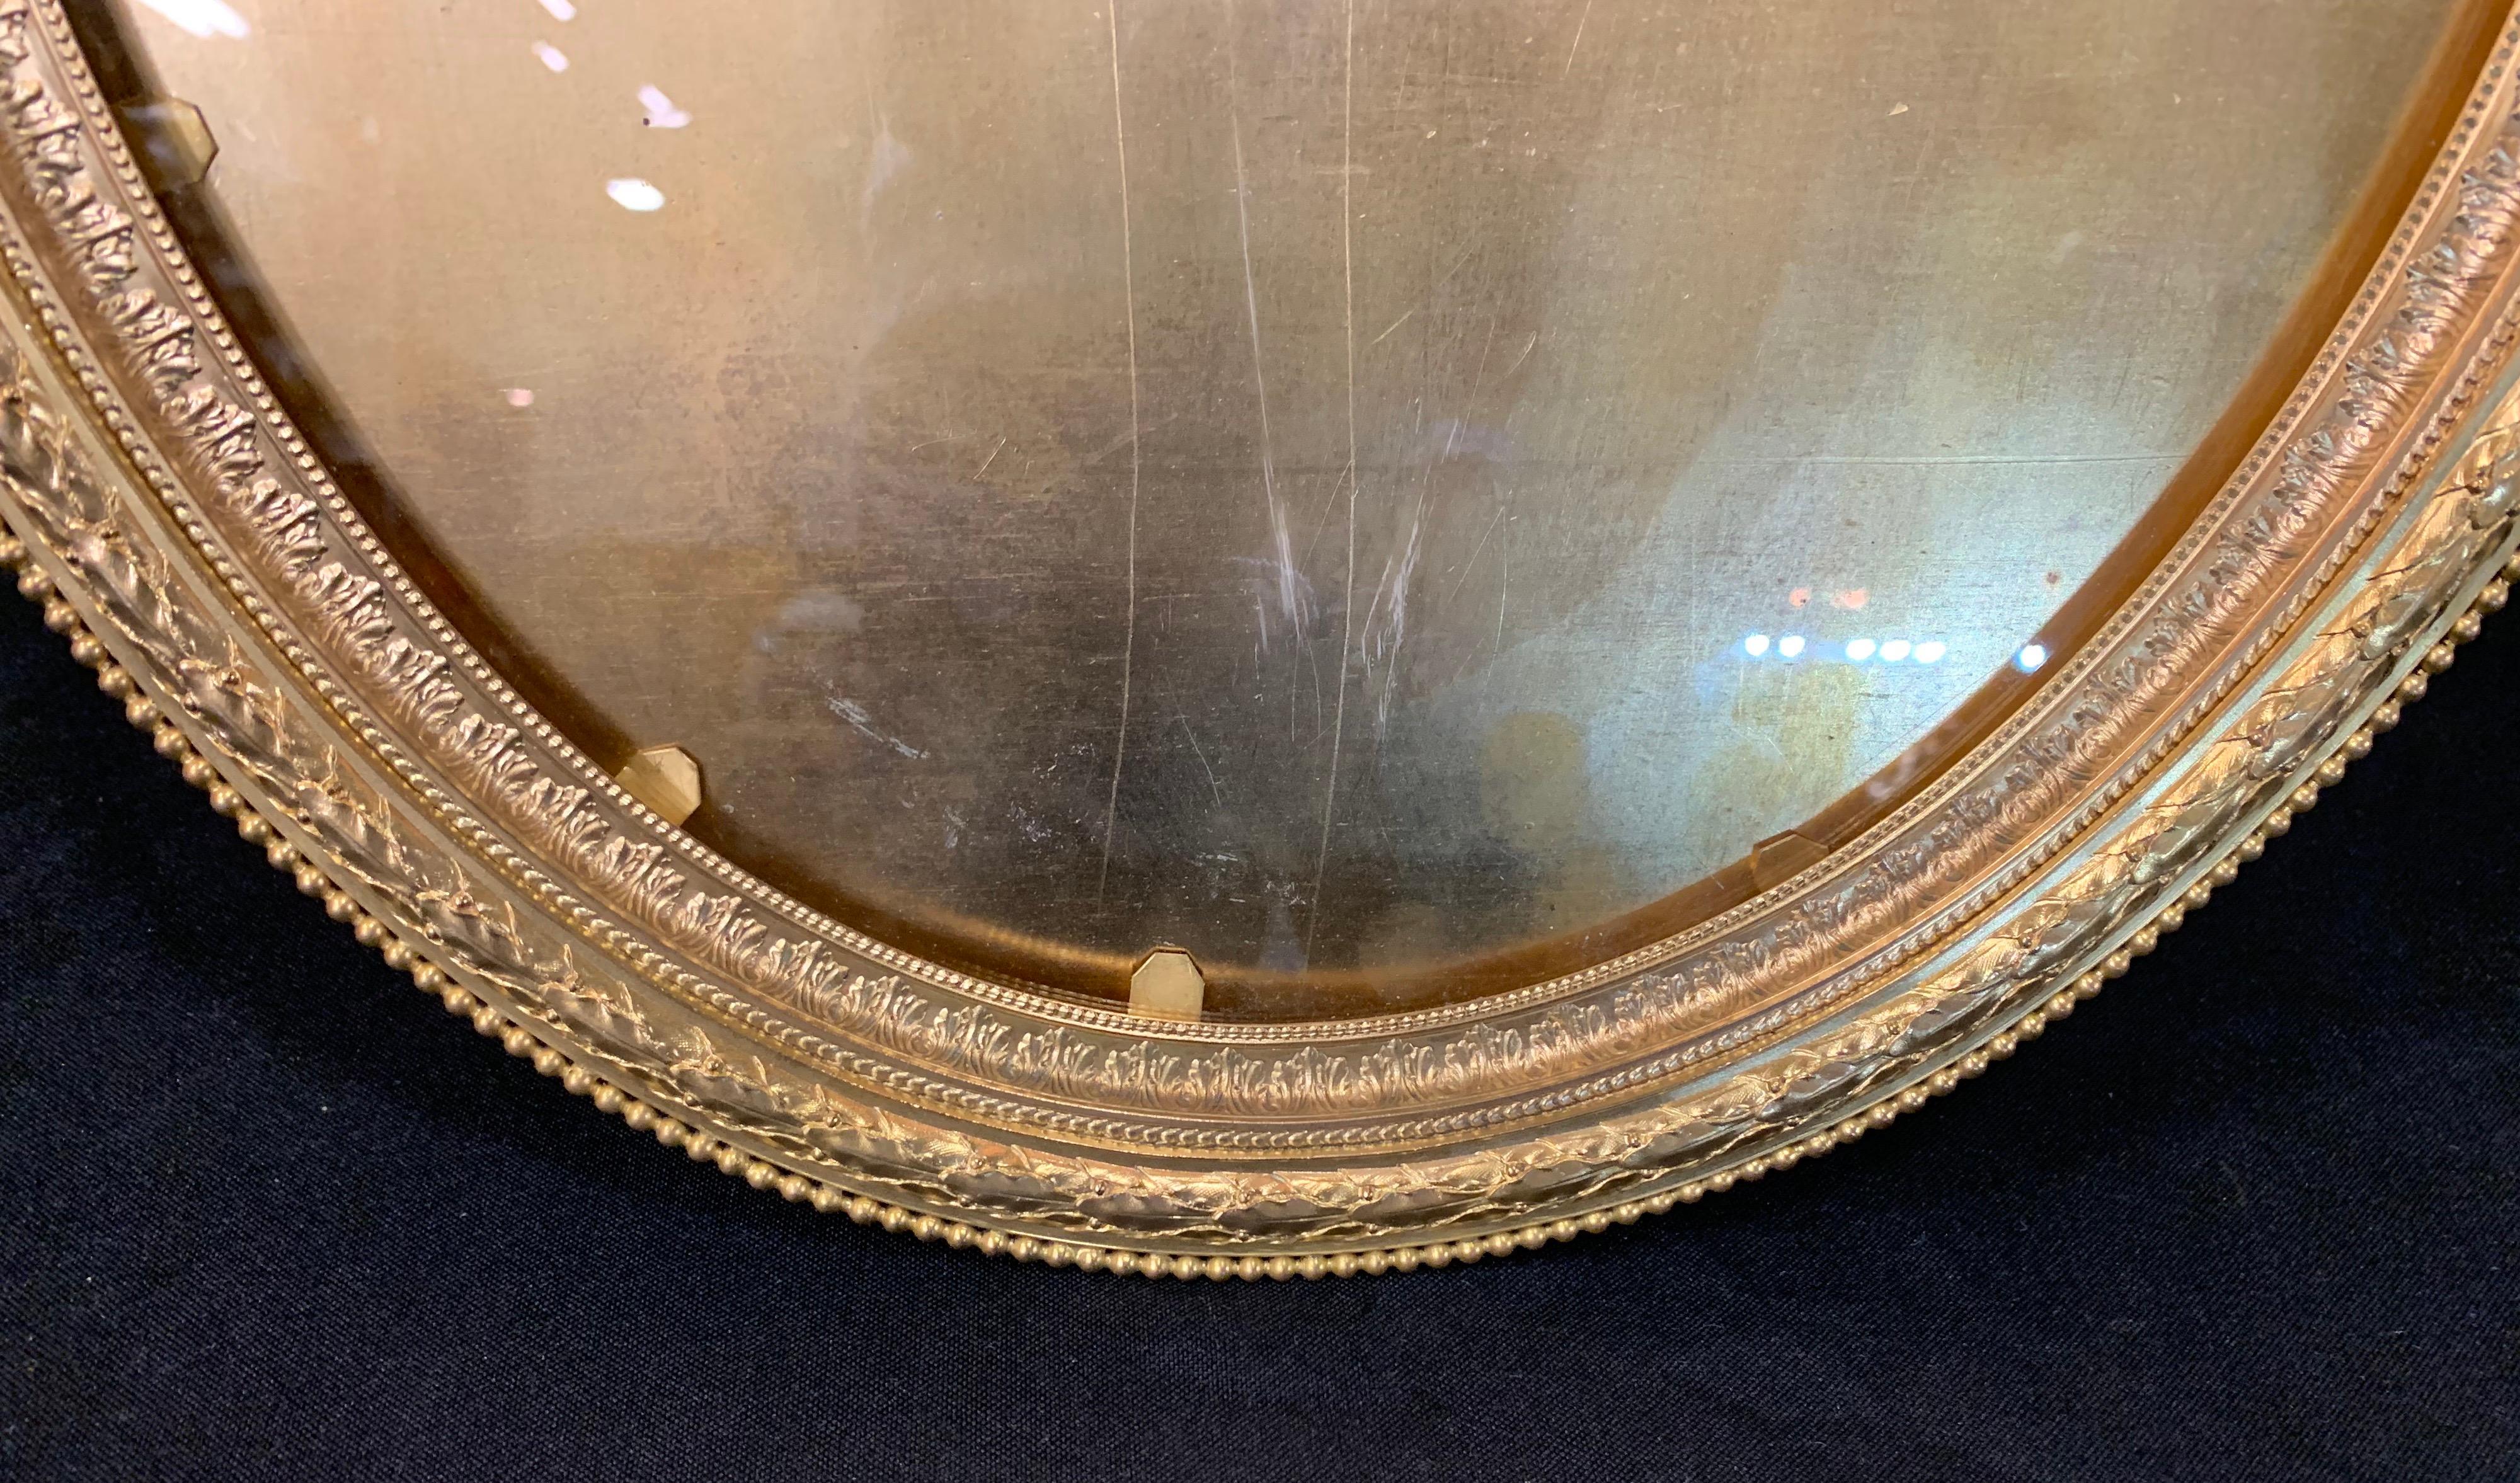 large oval picture frames